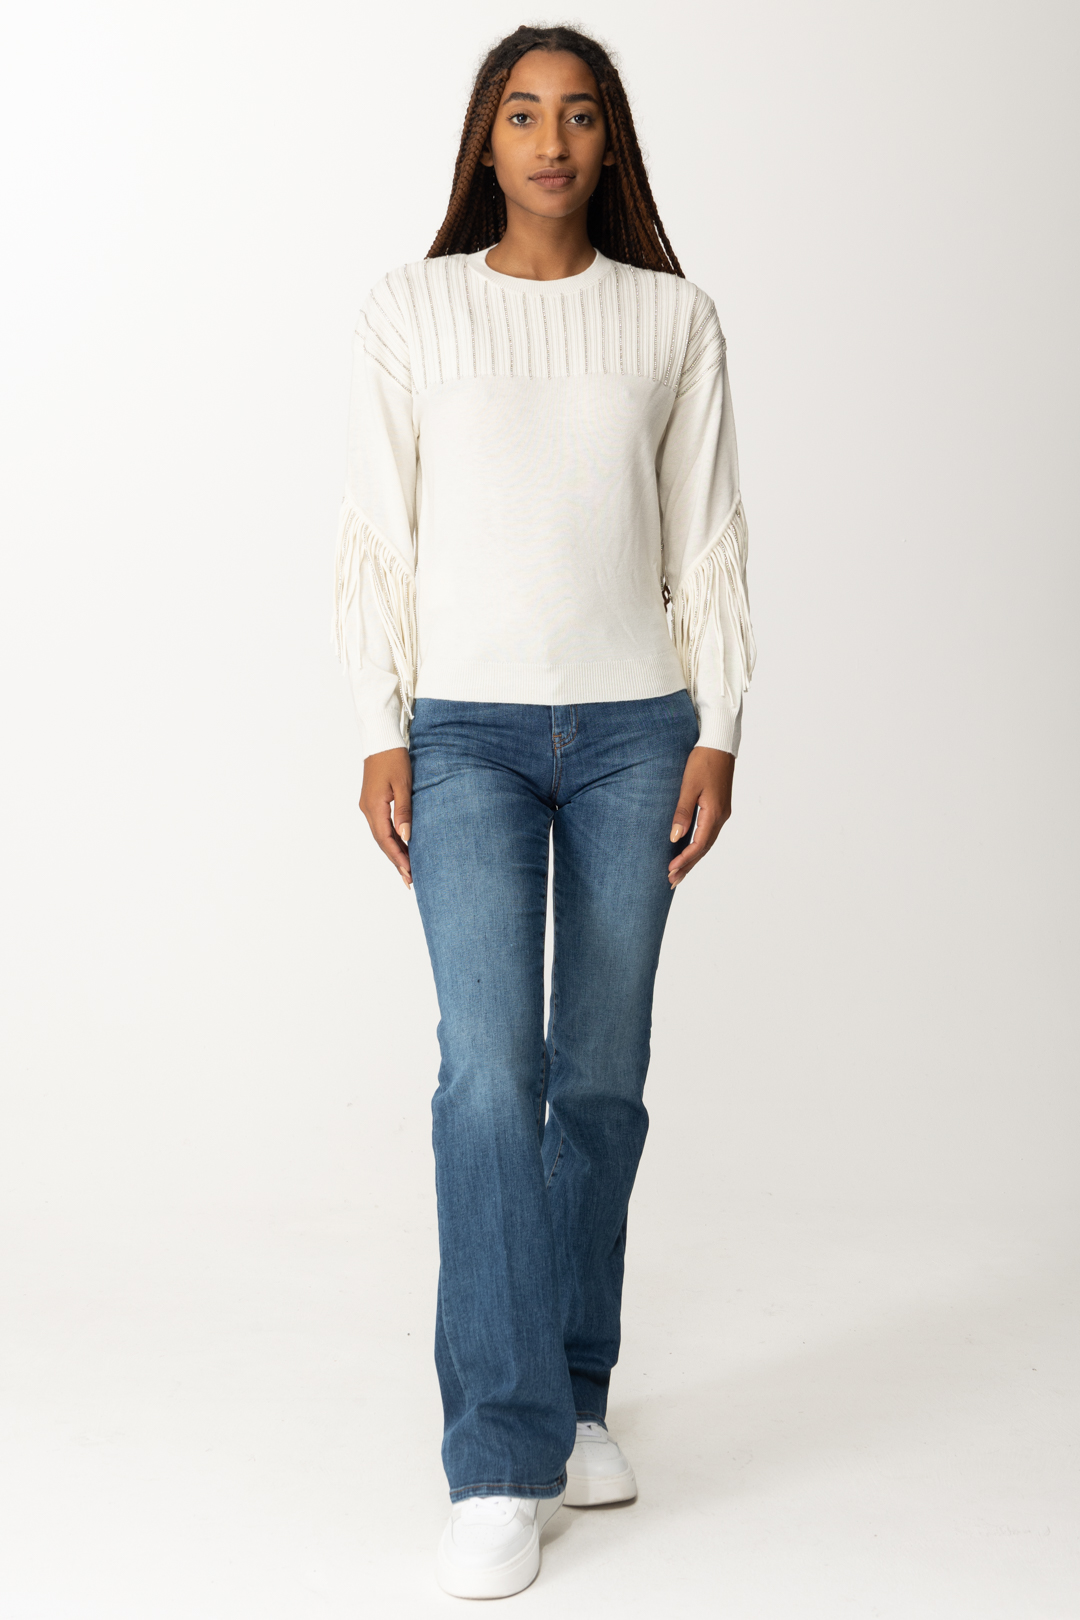 Preview: Pinko Pullover with Fringes and Rhinestones BIANCO LATTE